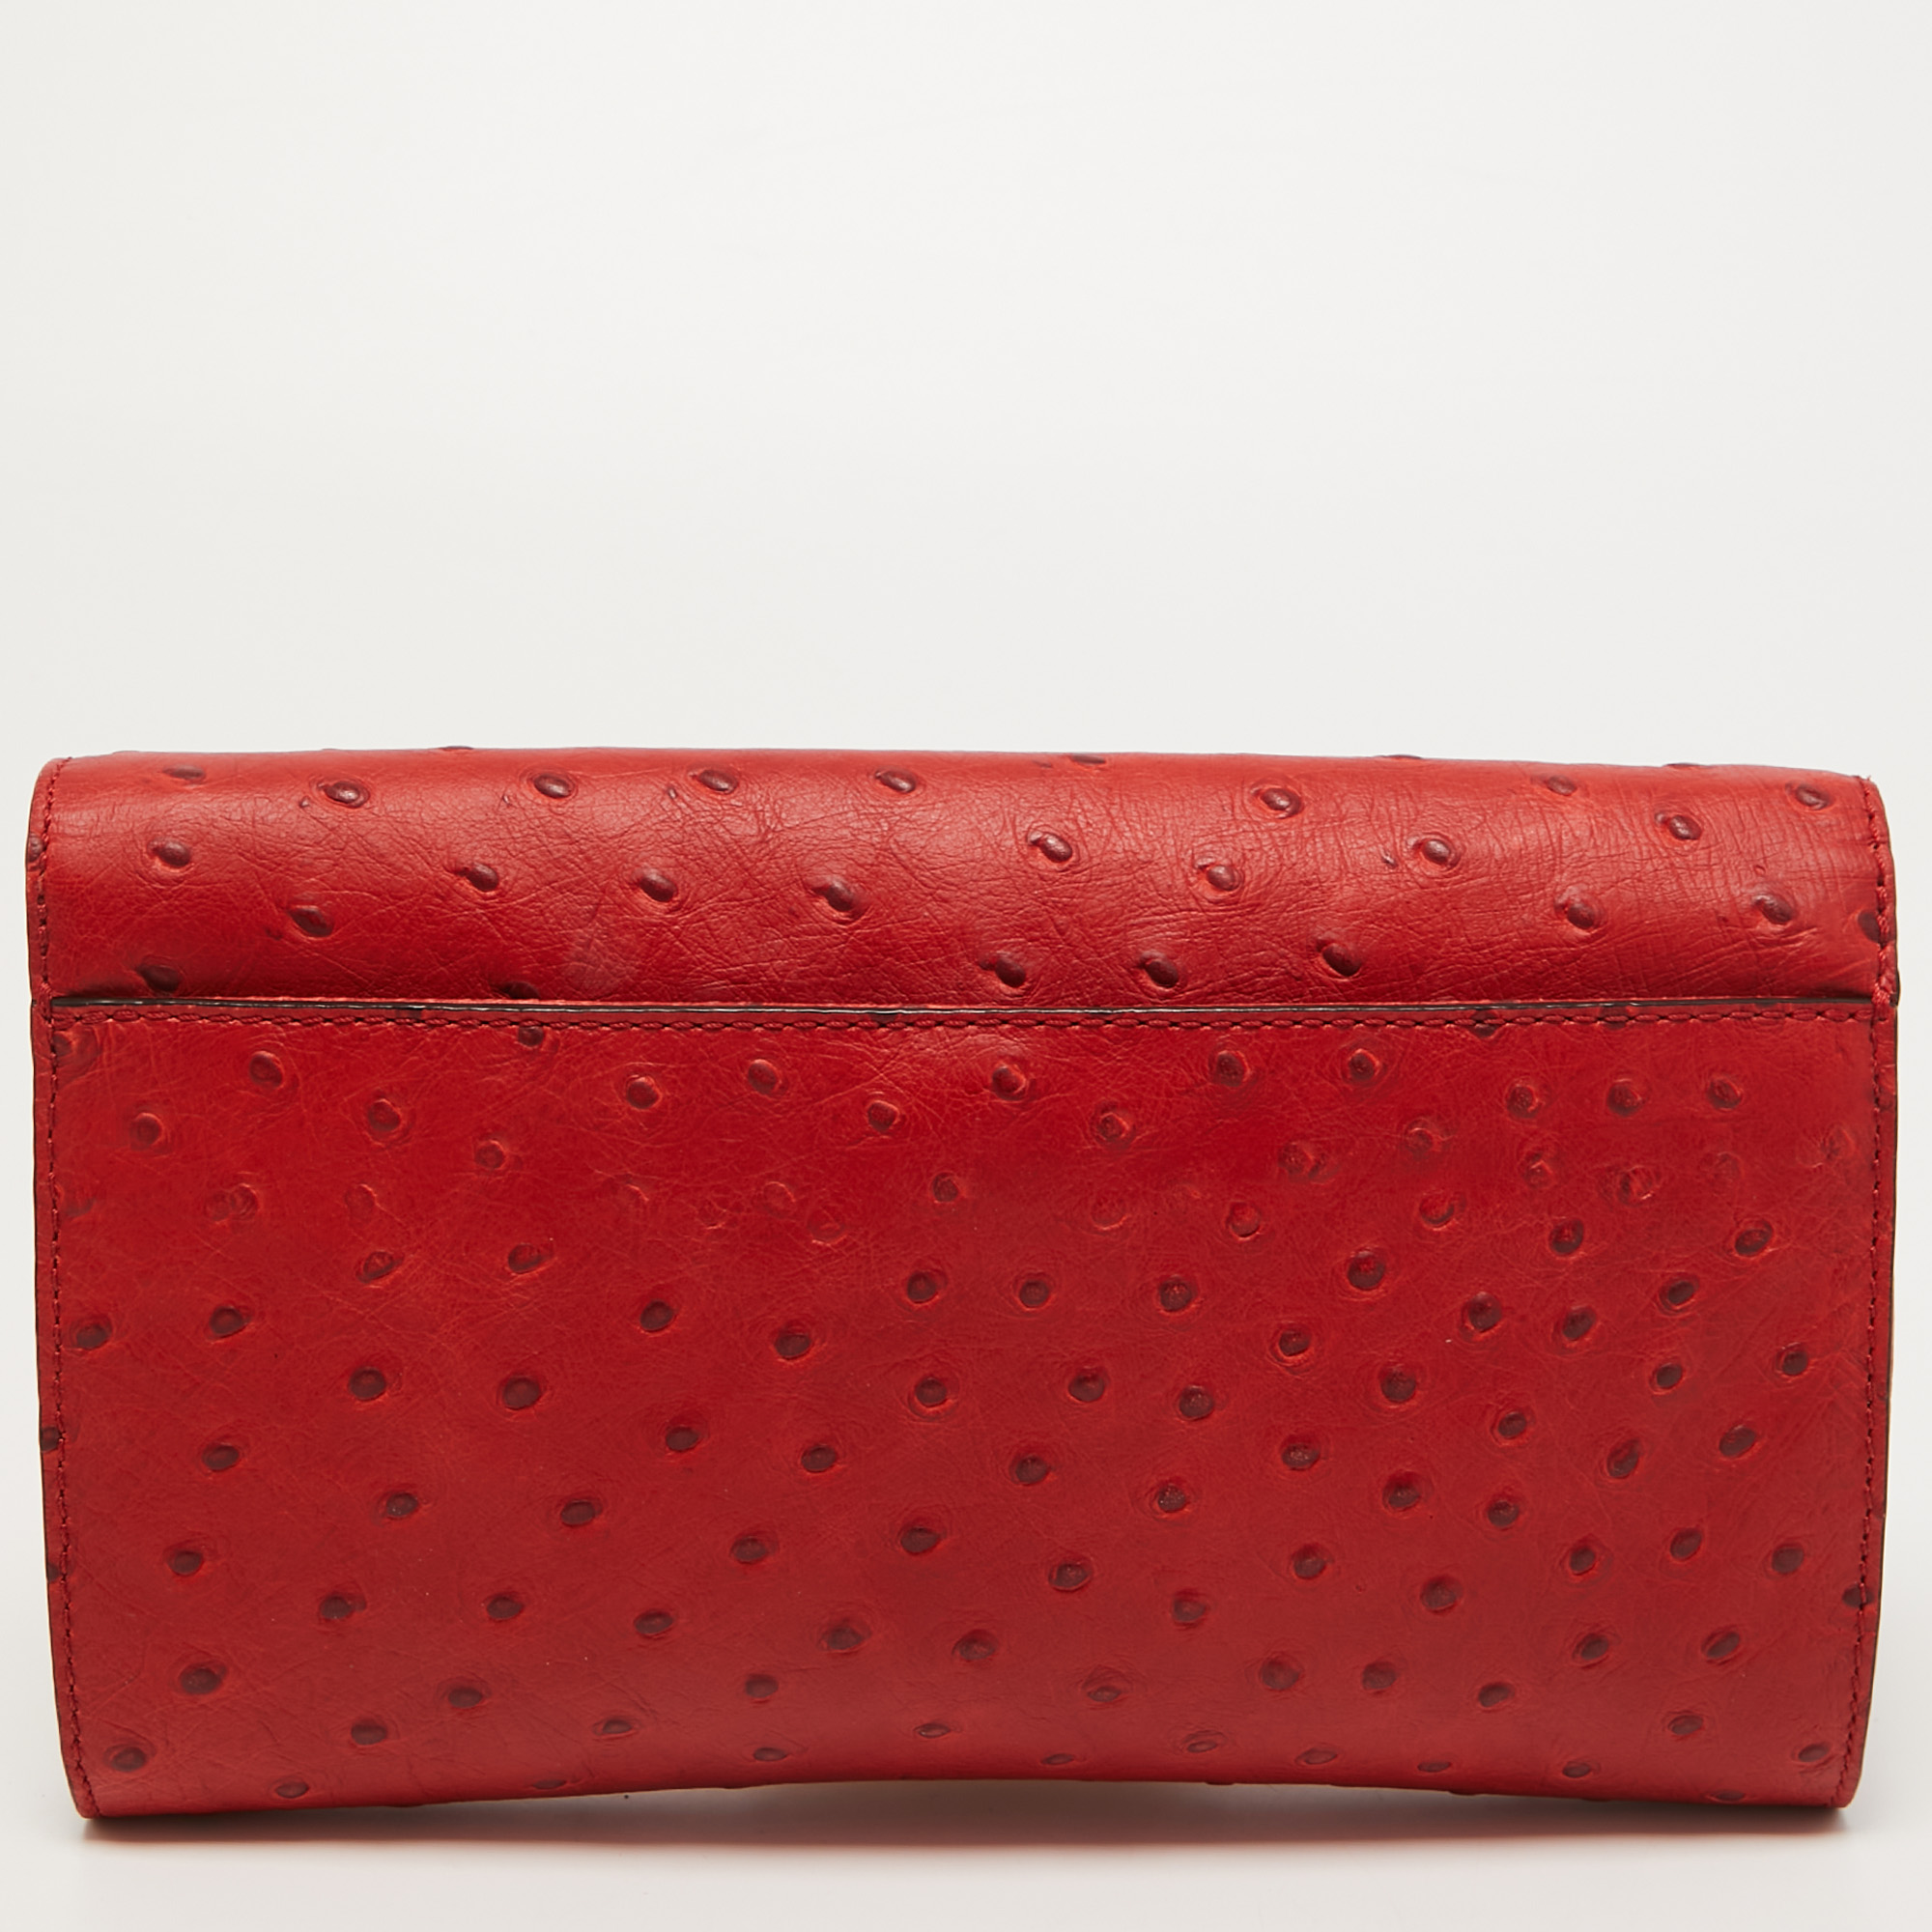 Michael Kors Red Ostrich Embossed Leather Gia Clutch